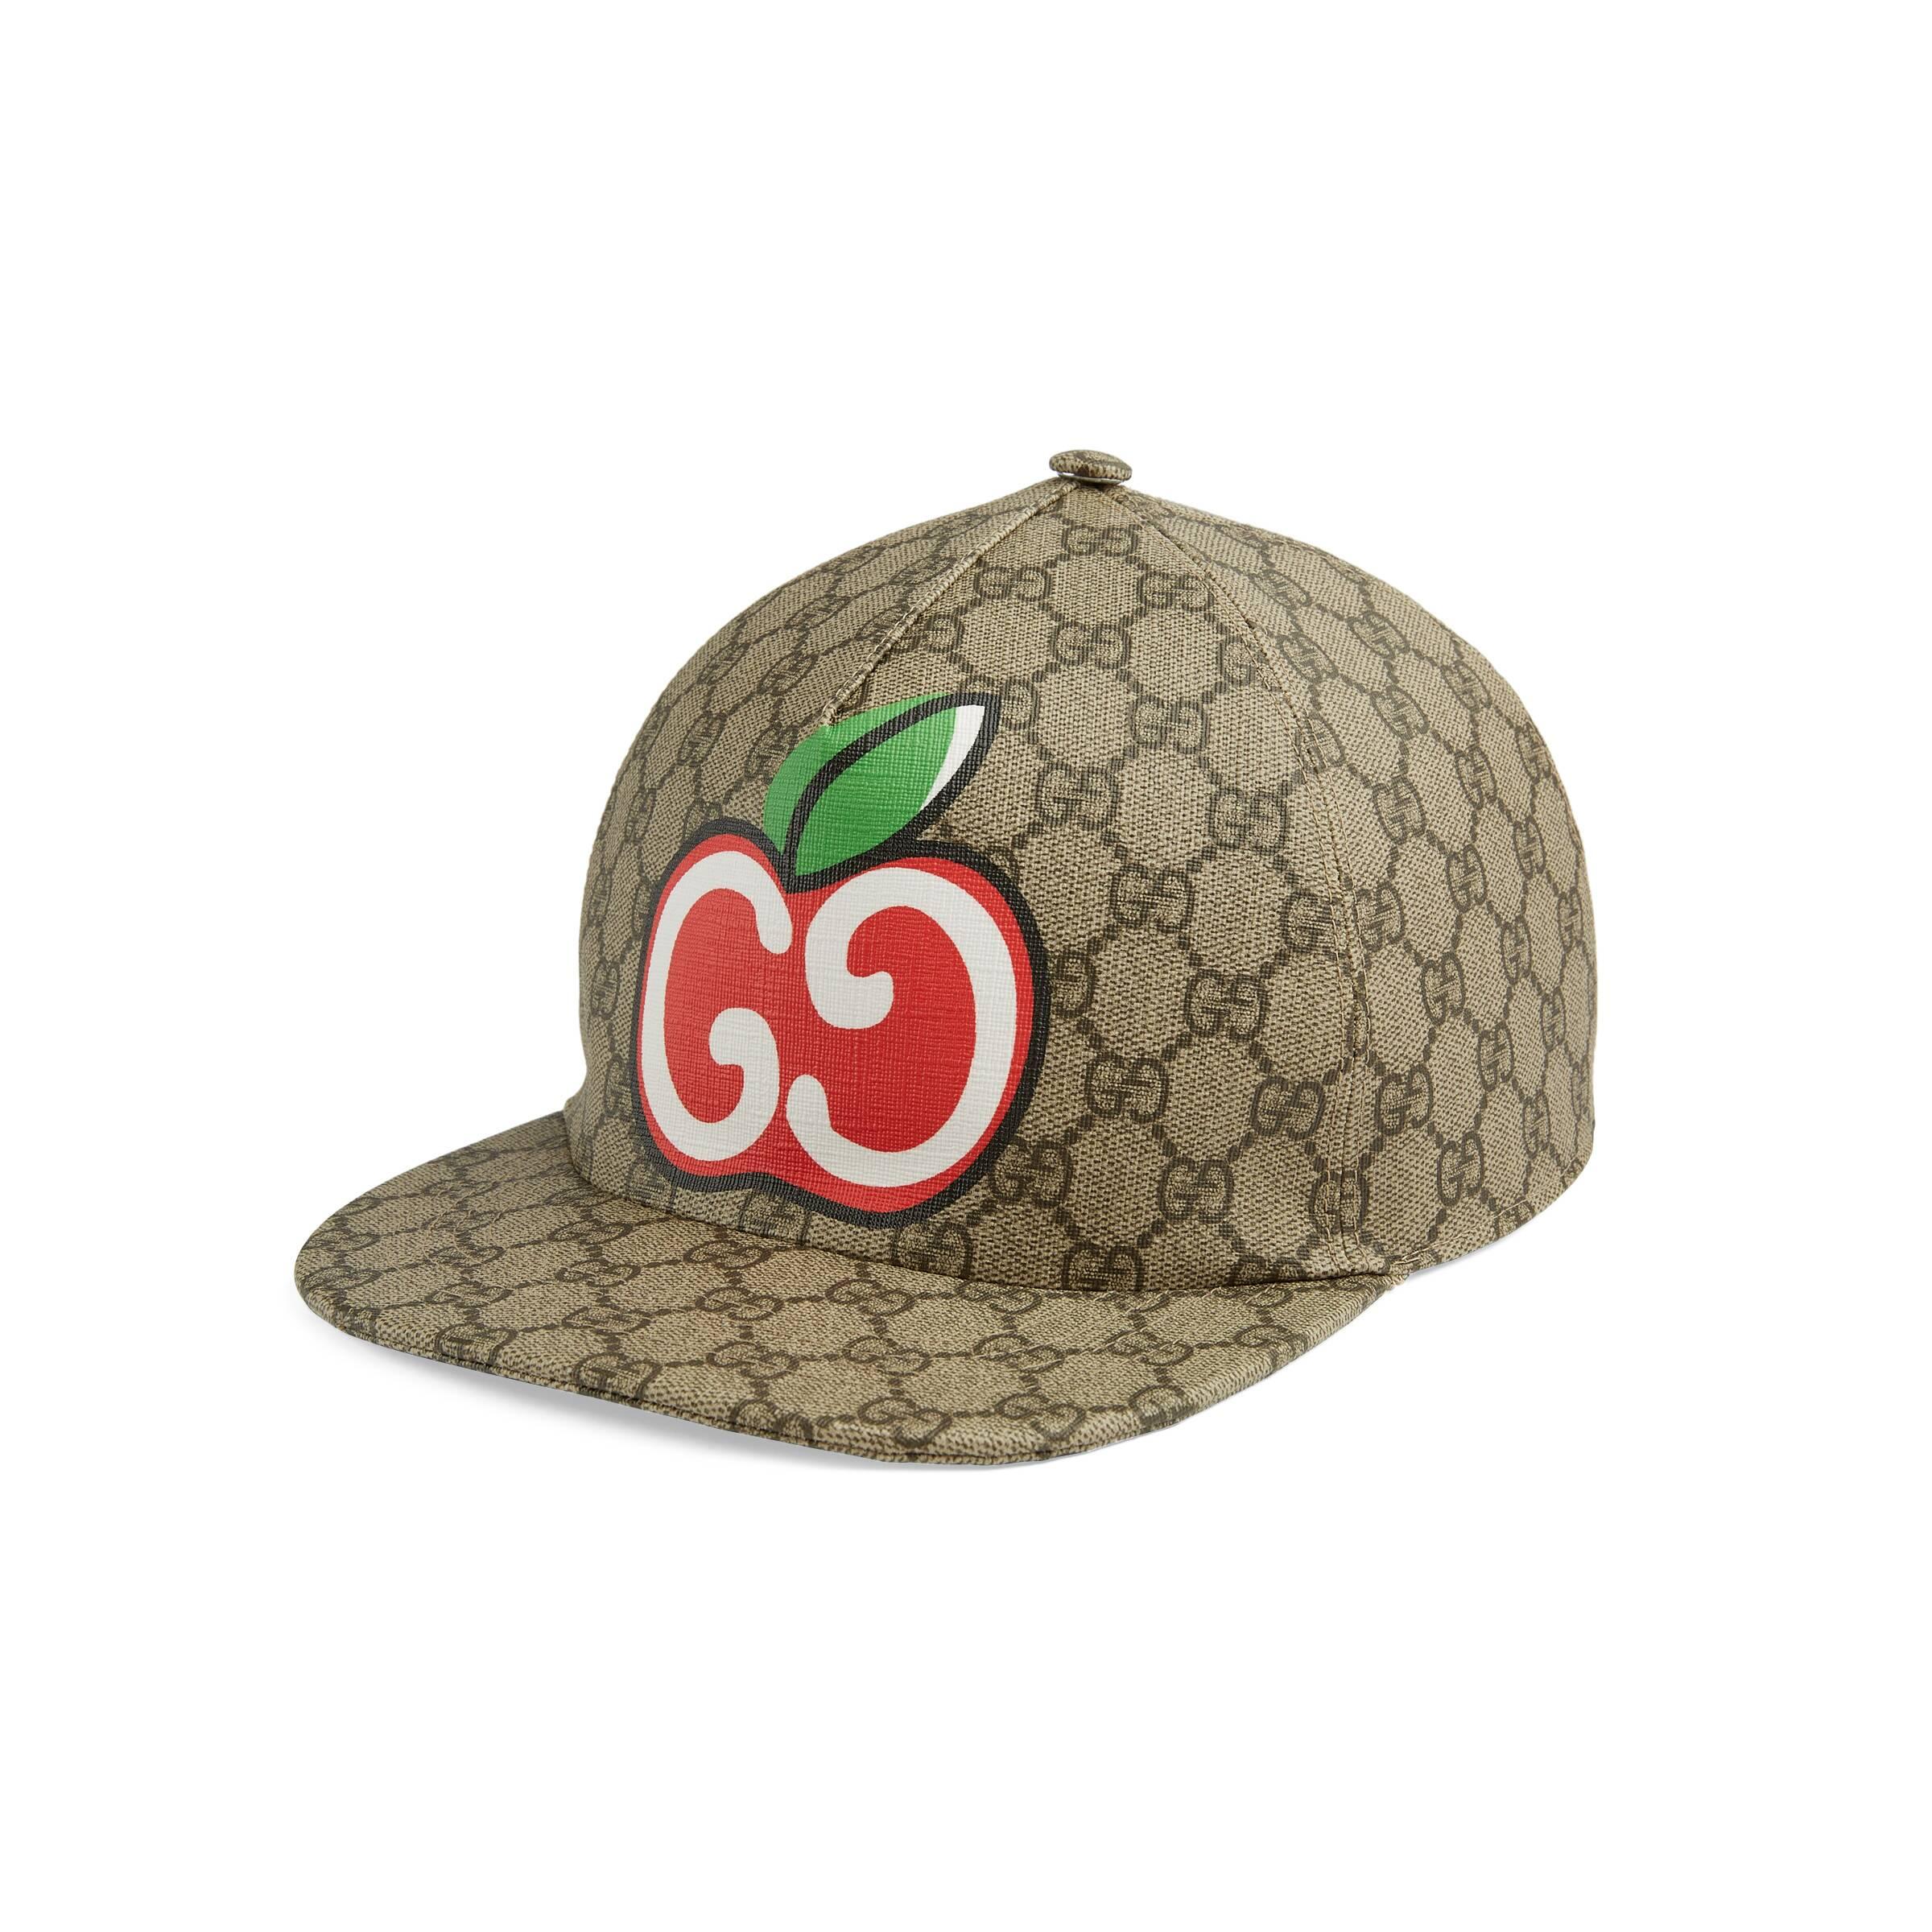 Gucci Canvas Baseball Hat With GG Apple Print in Natural | Lyst